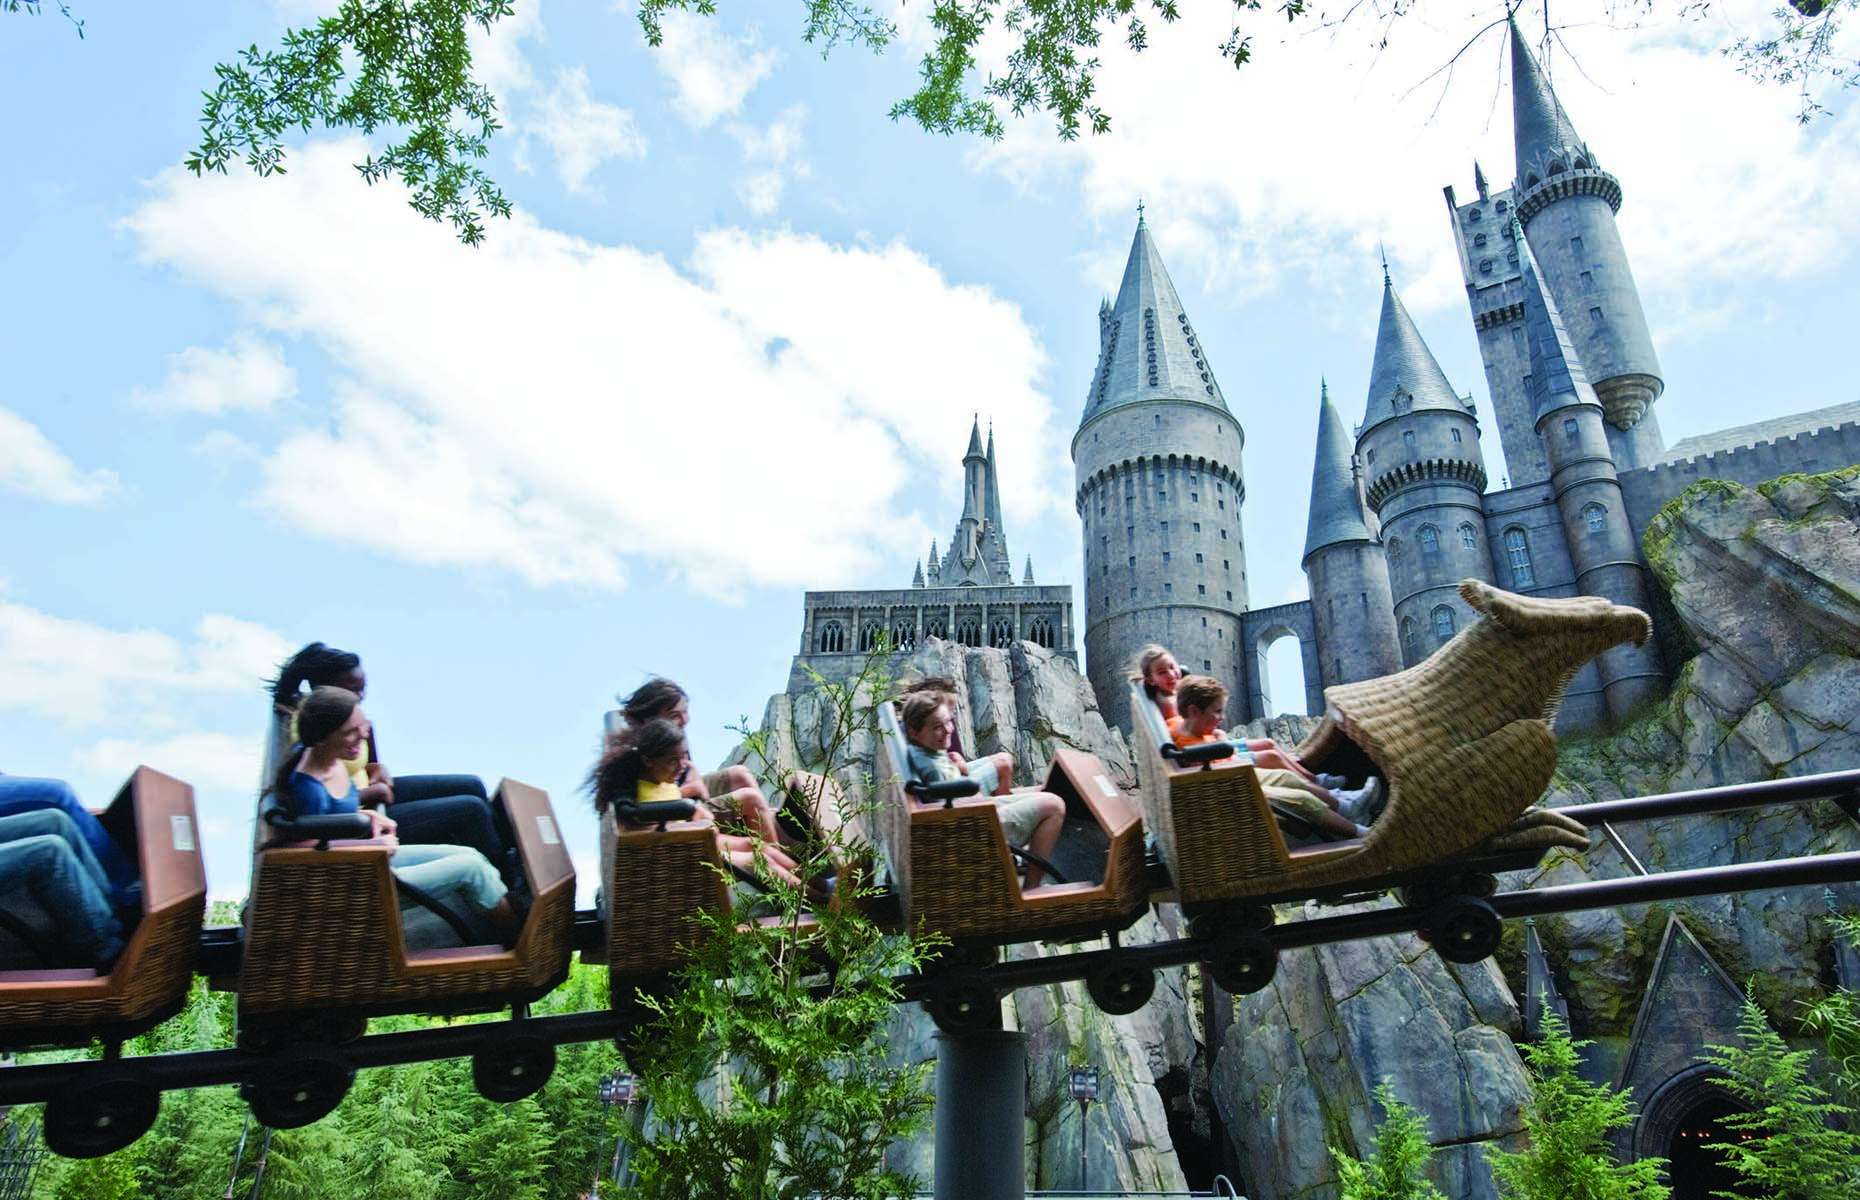 The Hippogriff ride (Image: The Wizarding World of Harry Potter)